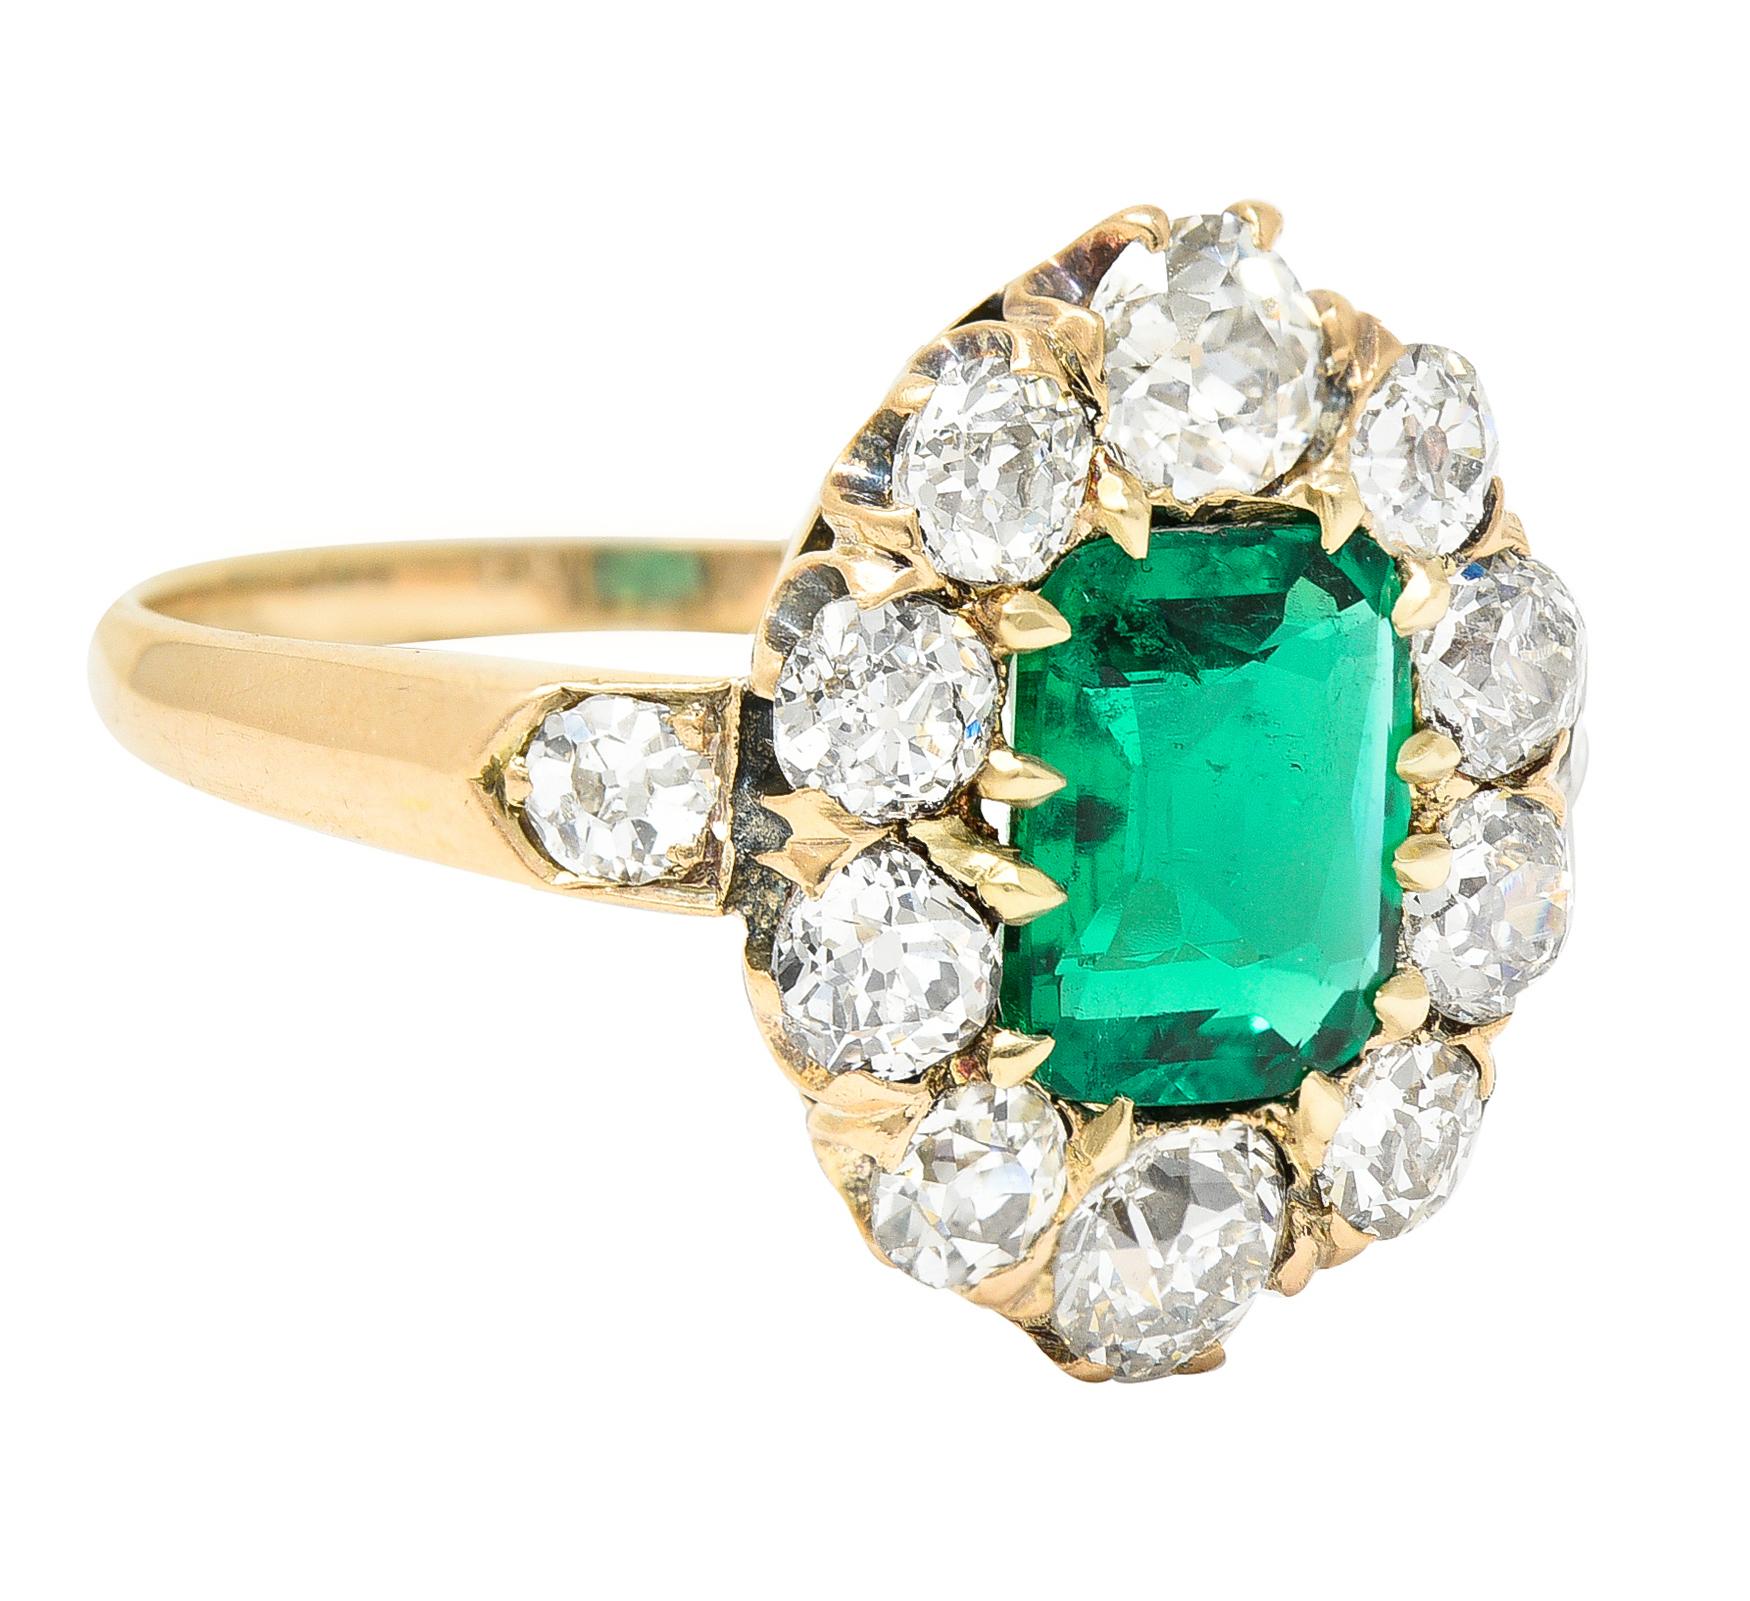 Centering a mixed cushion cut emerald weighing 1.05 carats total - prong set. Colombian in origin with minor traditional clarity enhancement. Transparent bright green in color - prong set with cluster surround. Featuring old European cut diamonds -